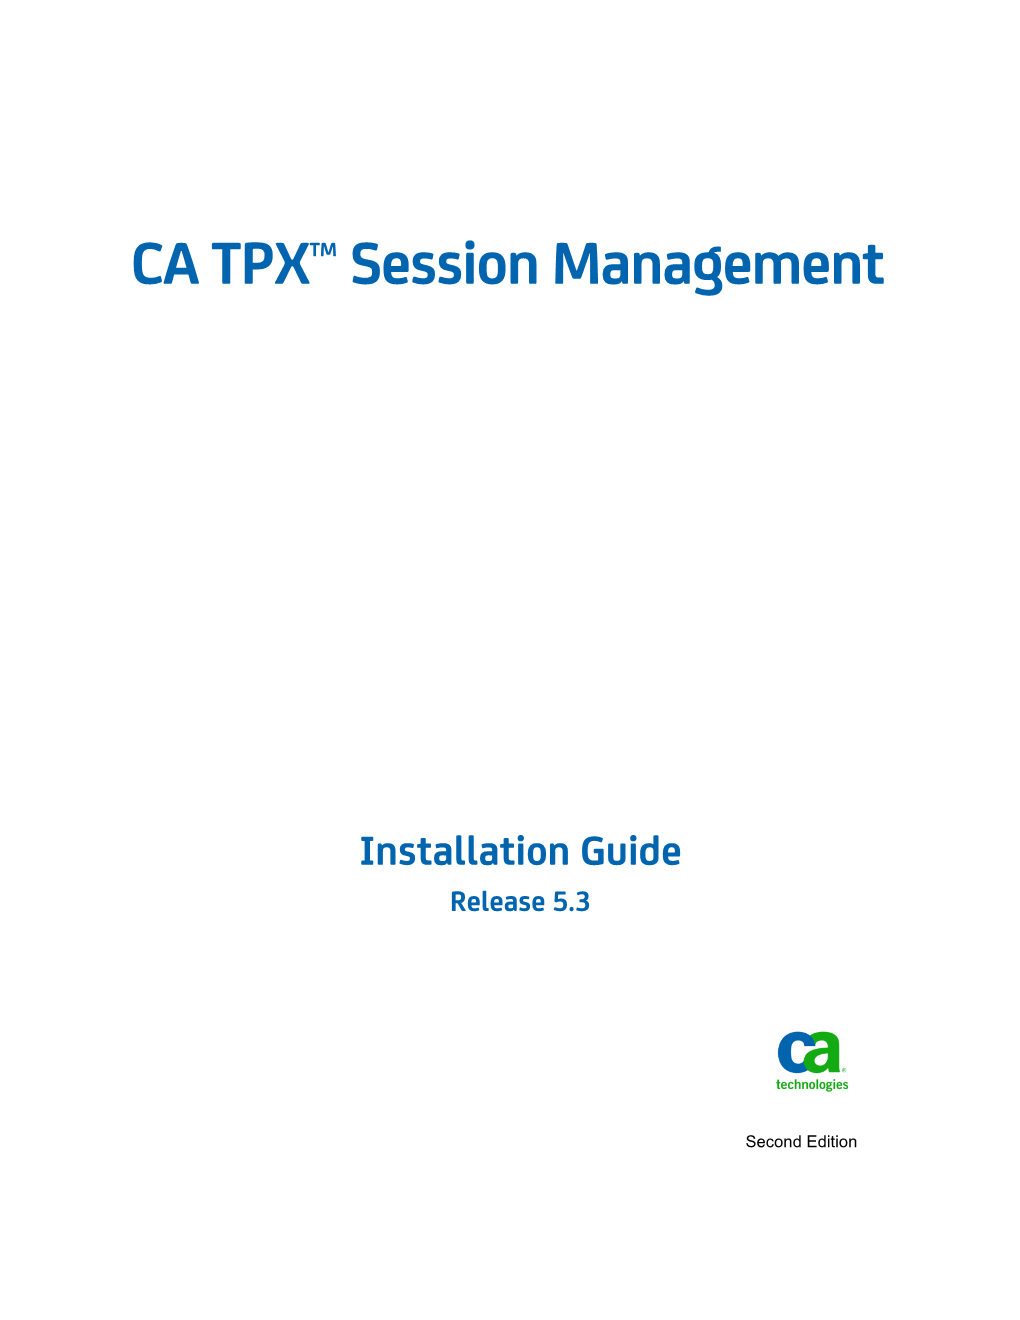 CA TPX Session Management Installation Guide